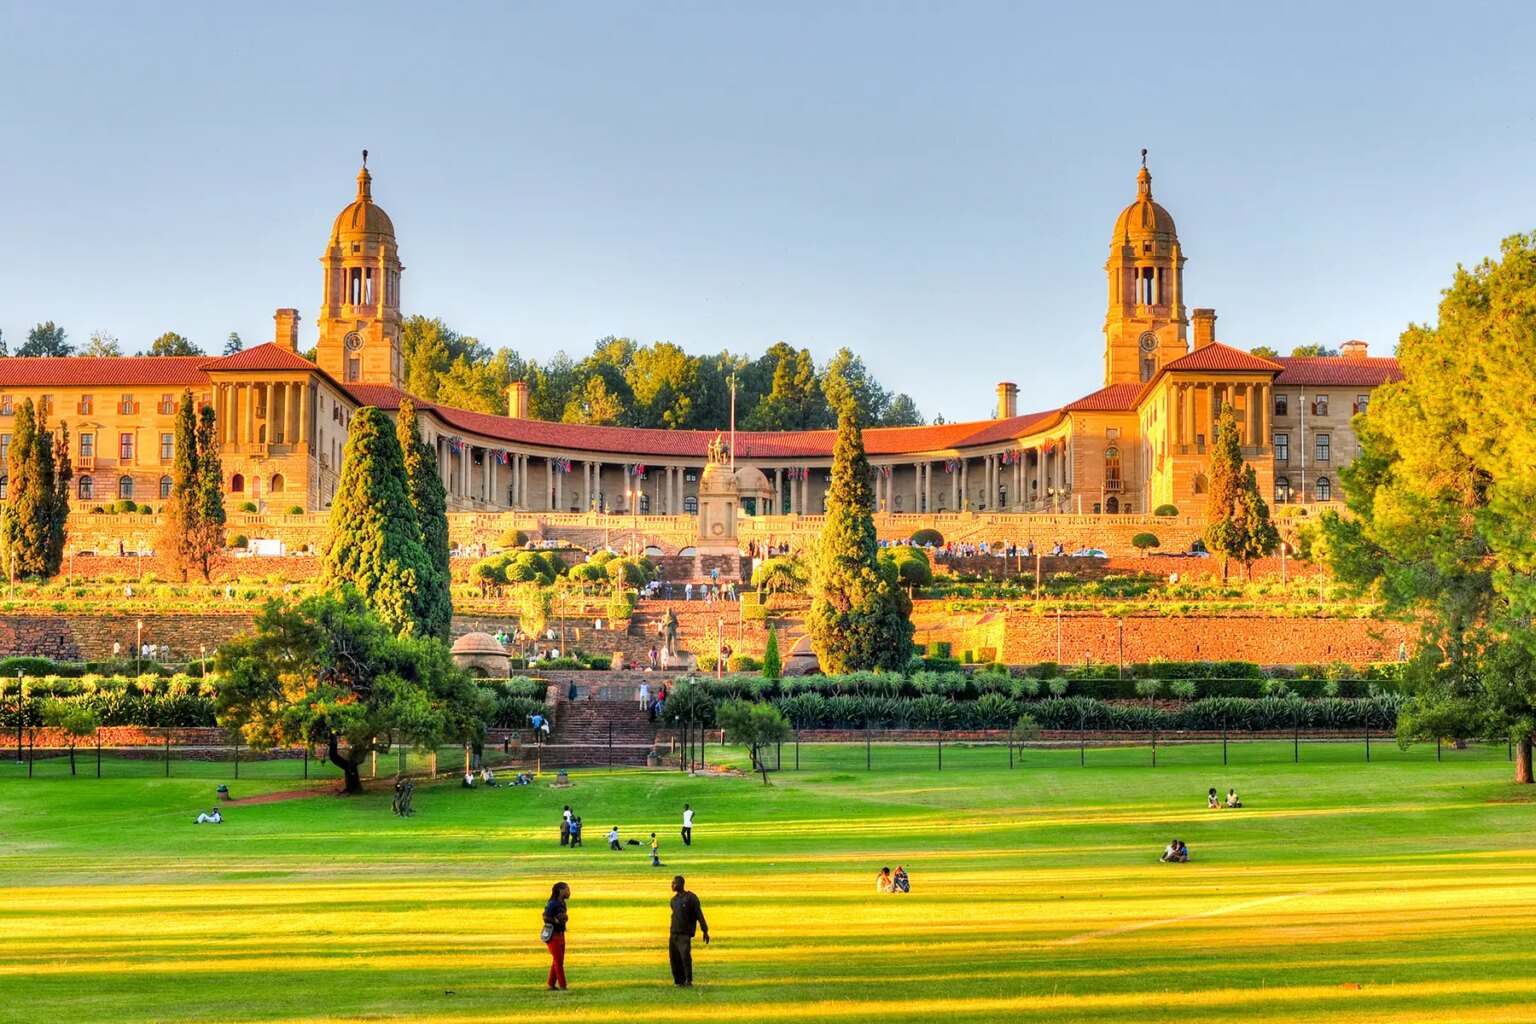 Exterior of the Union Buildings and lawn